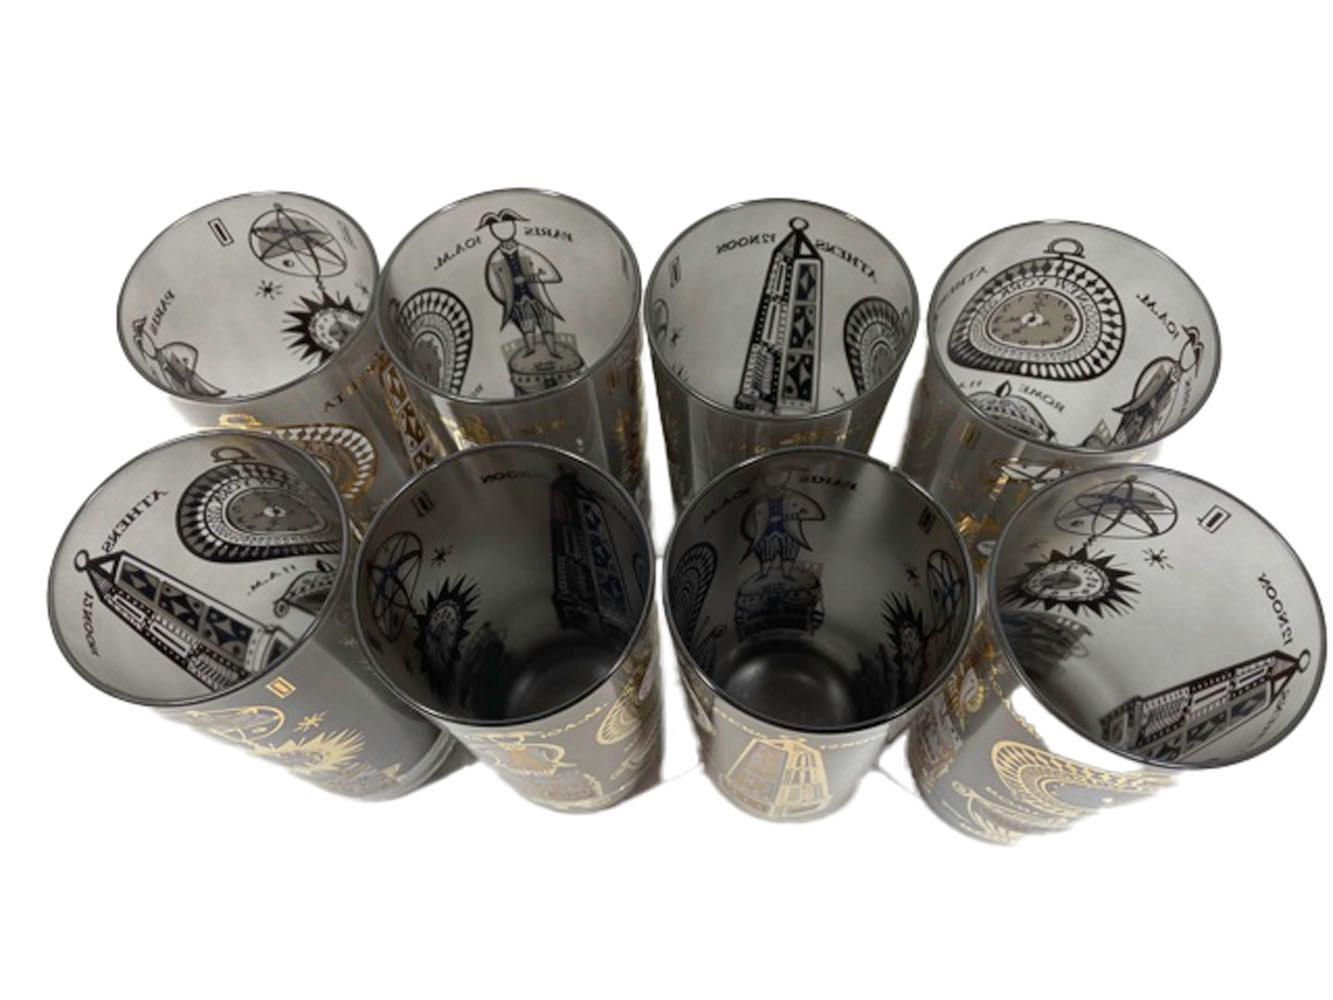 Set of 16 Mid-Century Modern Georges Briard glasses in the International Time Zone pattern. Costing of 8 highball and 8 double old fashioned glasses of clear glass with the interiors frosted a grey/black and decorated on the outside in 22k gold and